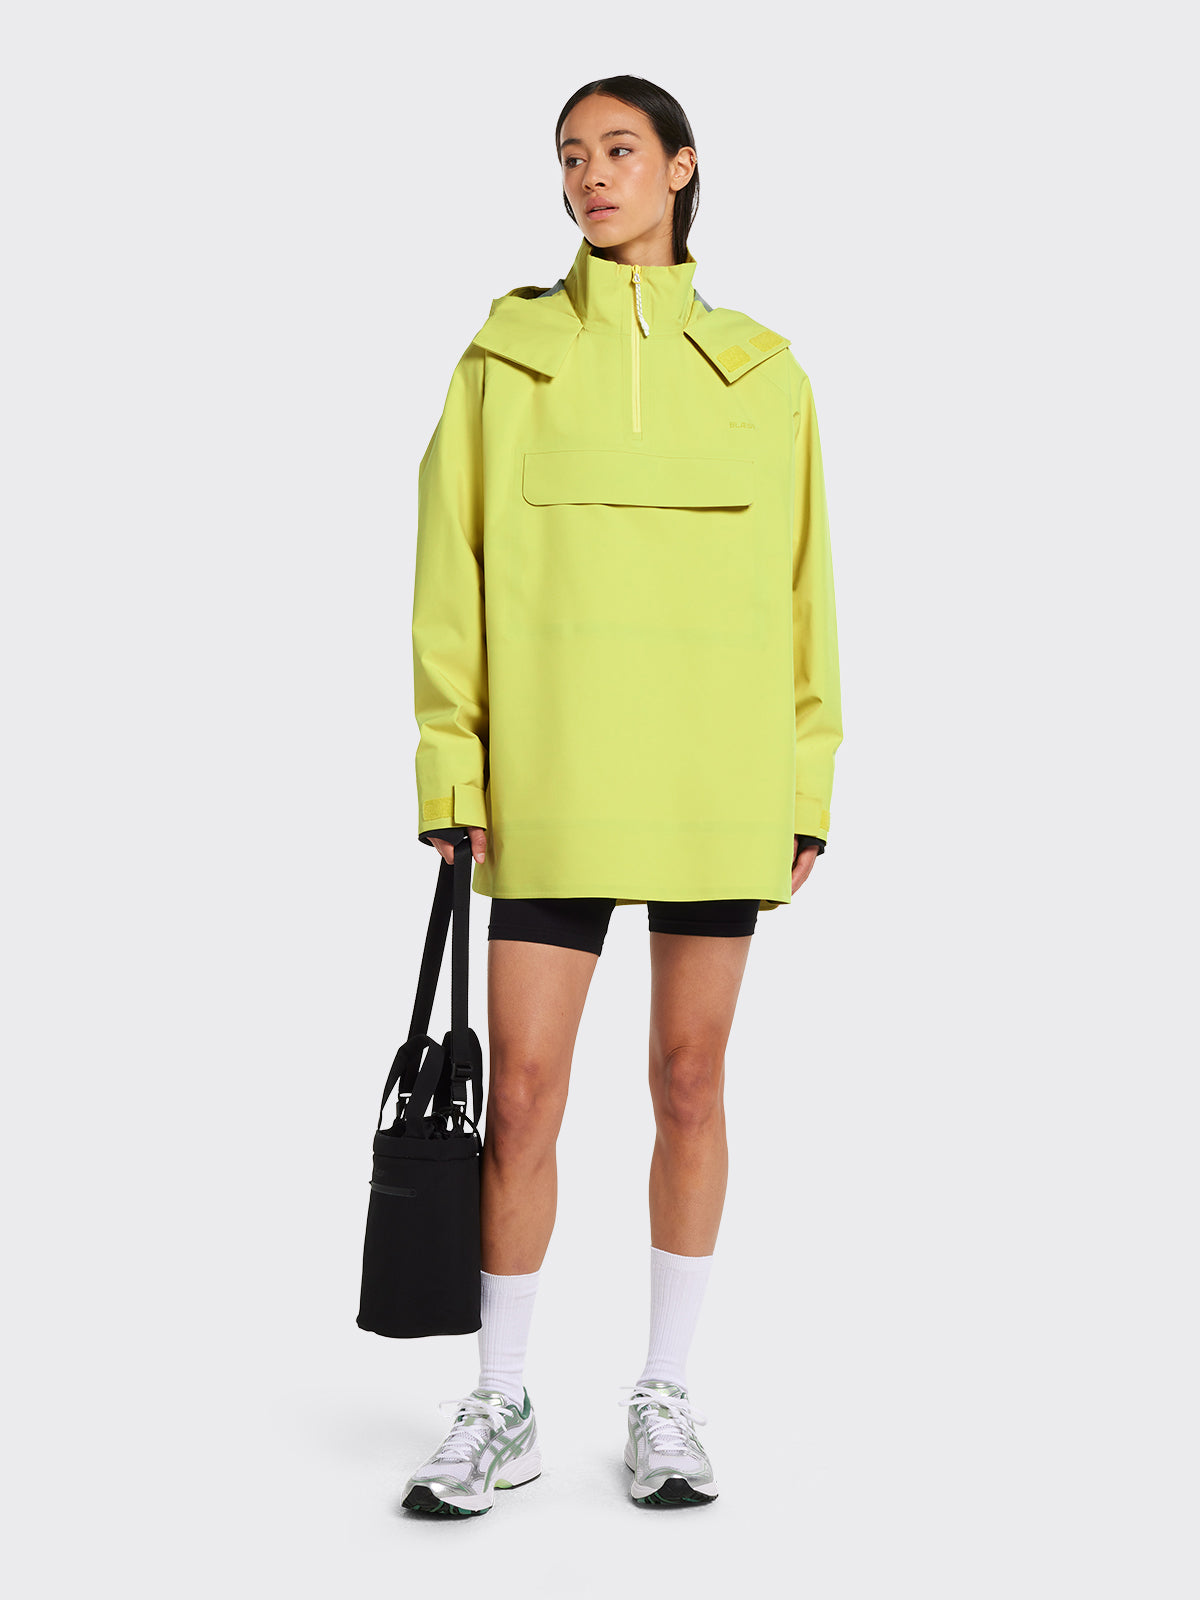 Voss poncho in the color Muted Lime from Blæst